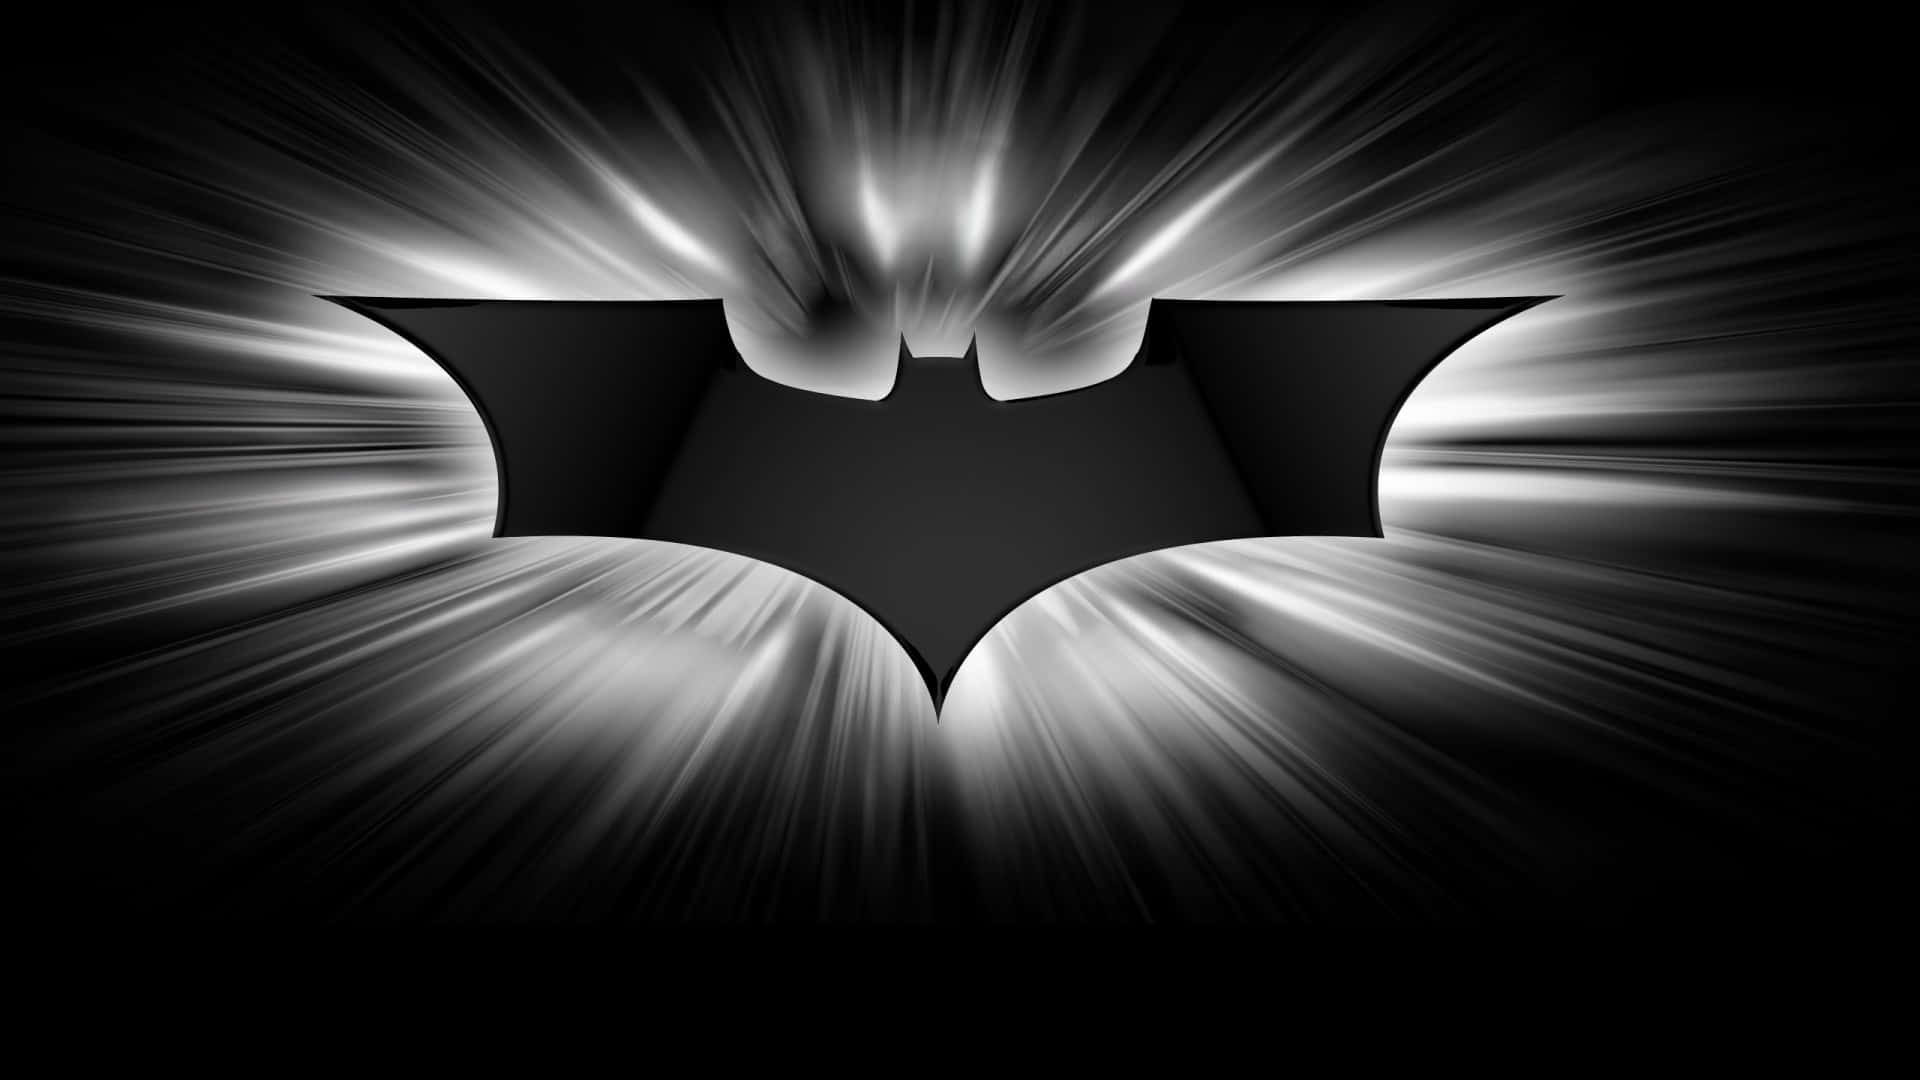 The Dark Knight - His justice reigns at night Wallpaper